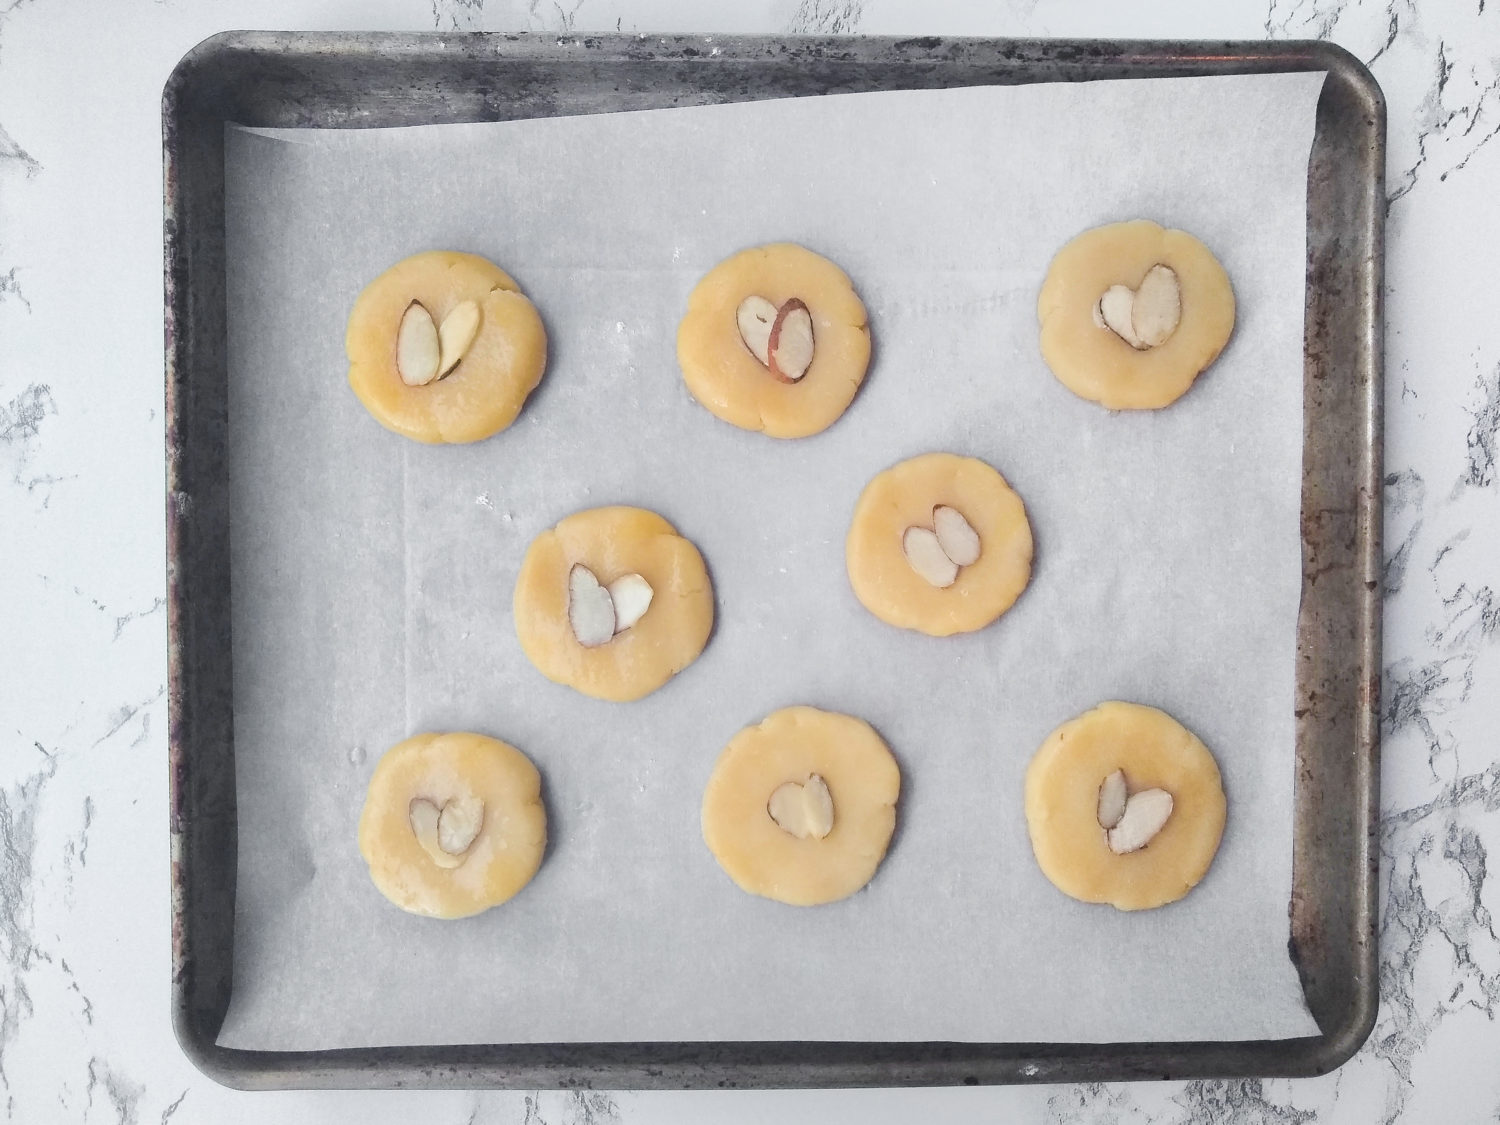 Chinese Almond Cookies About to Bake